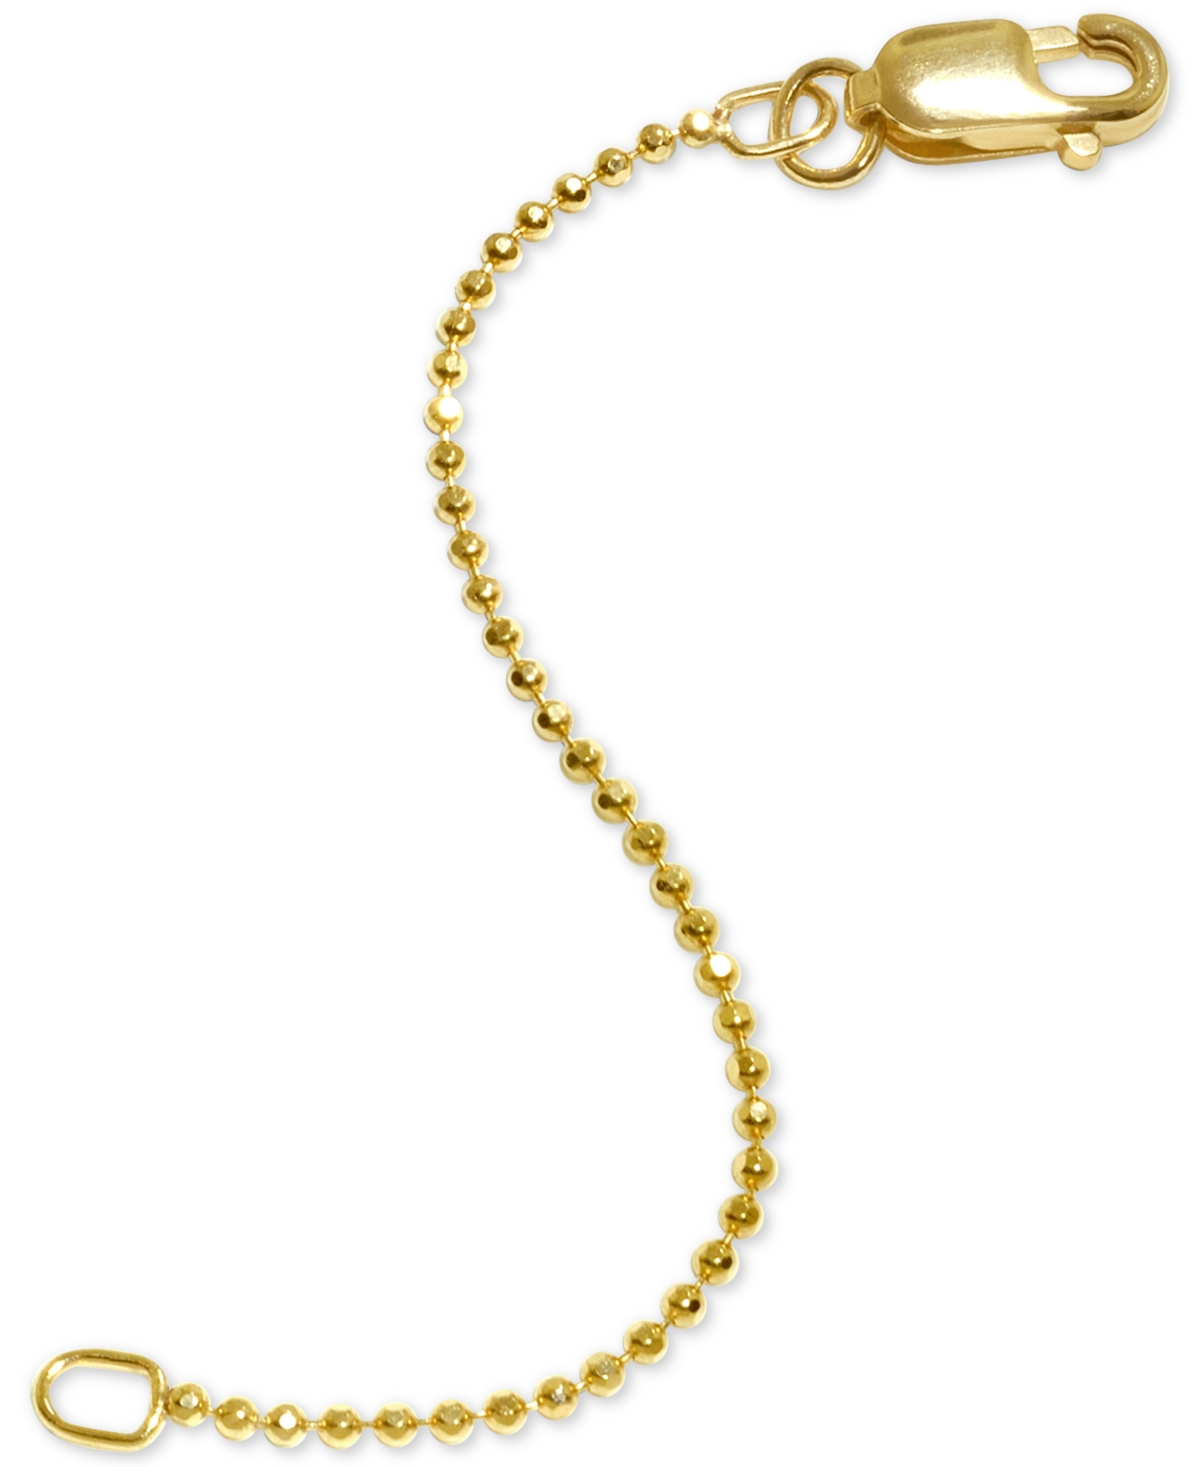 Beaded 2" Chain Extender in 14k Gold - Yellow Gold